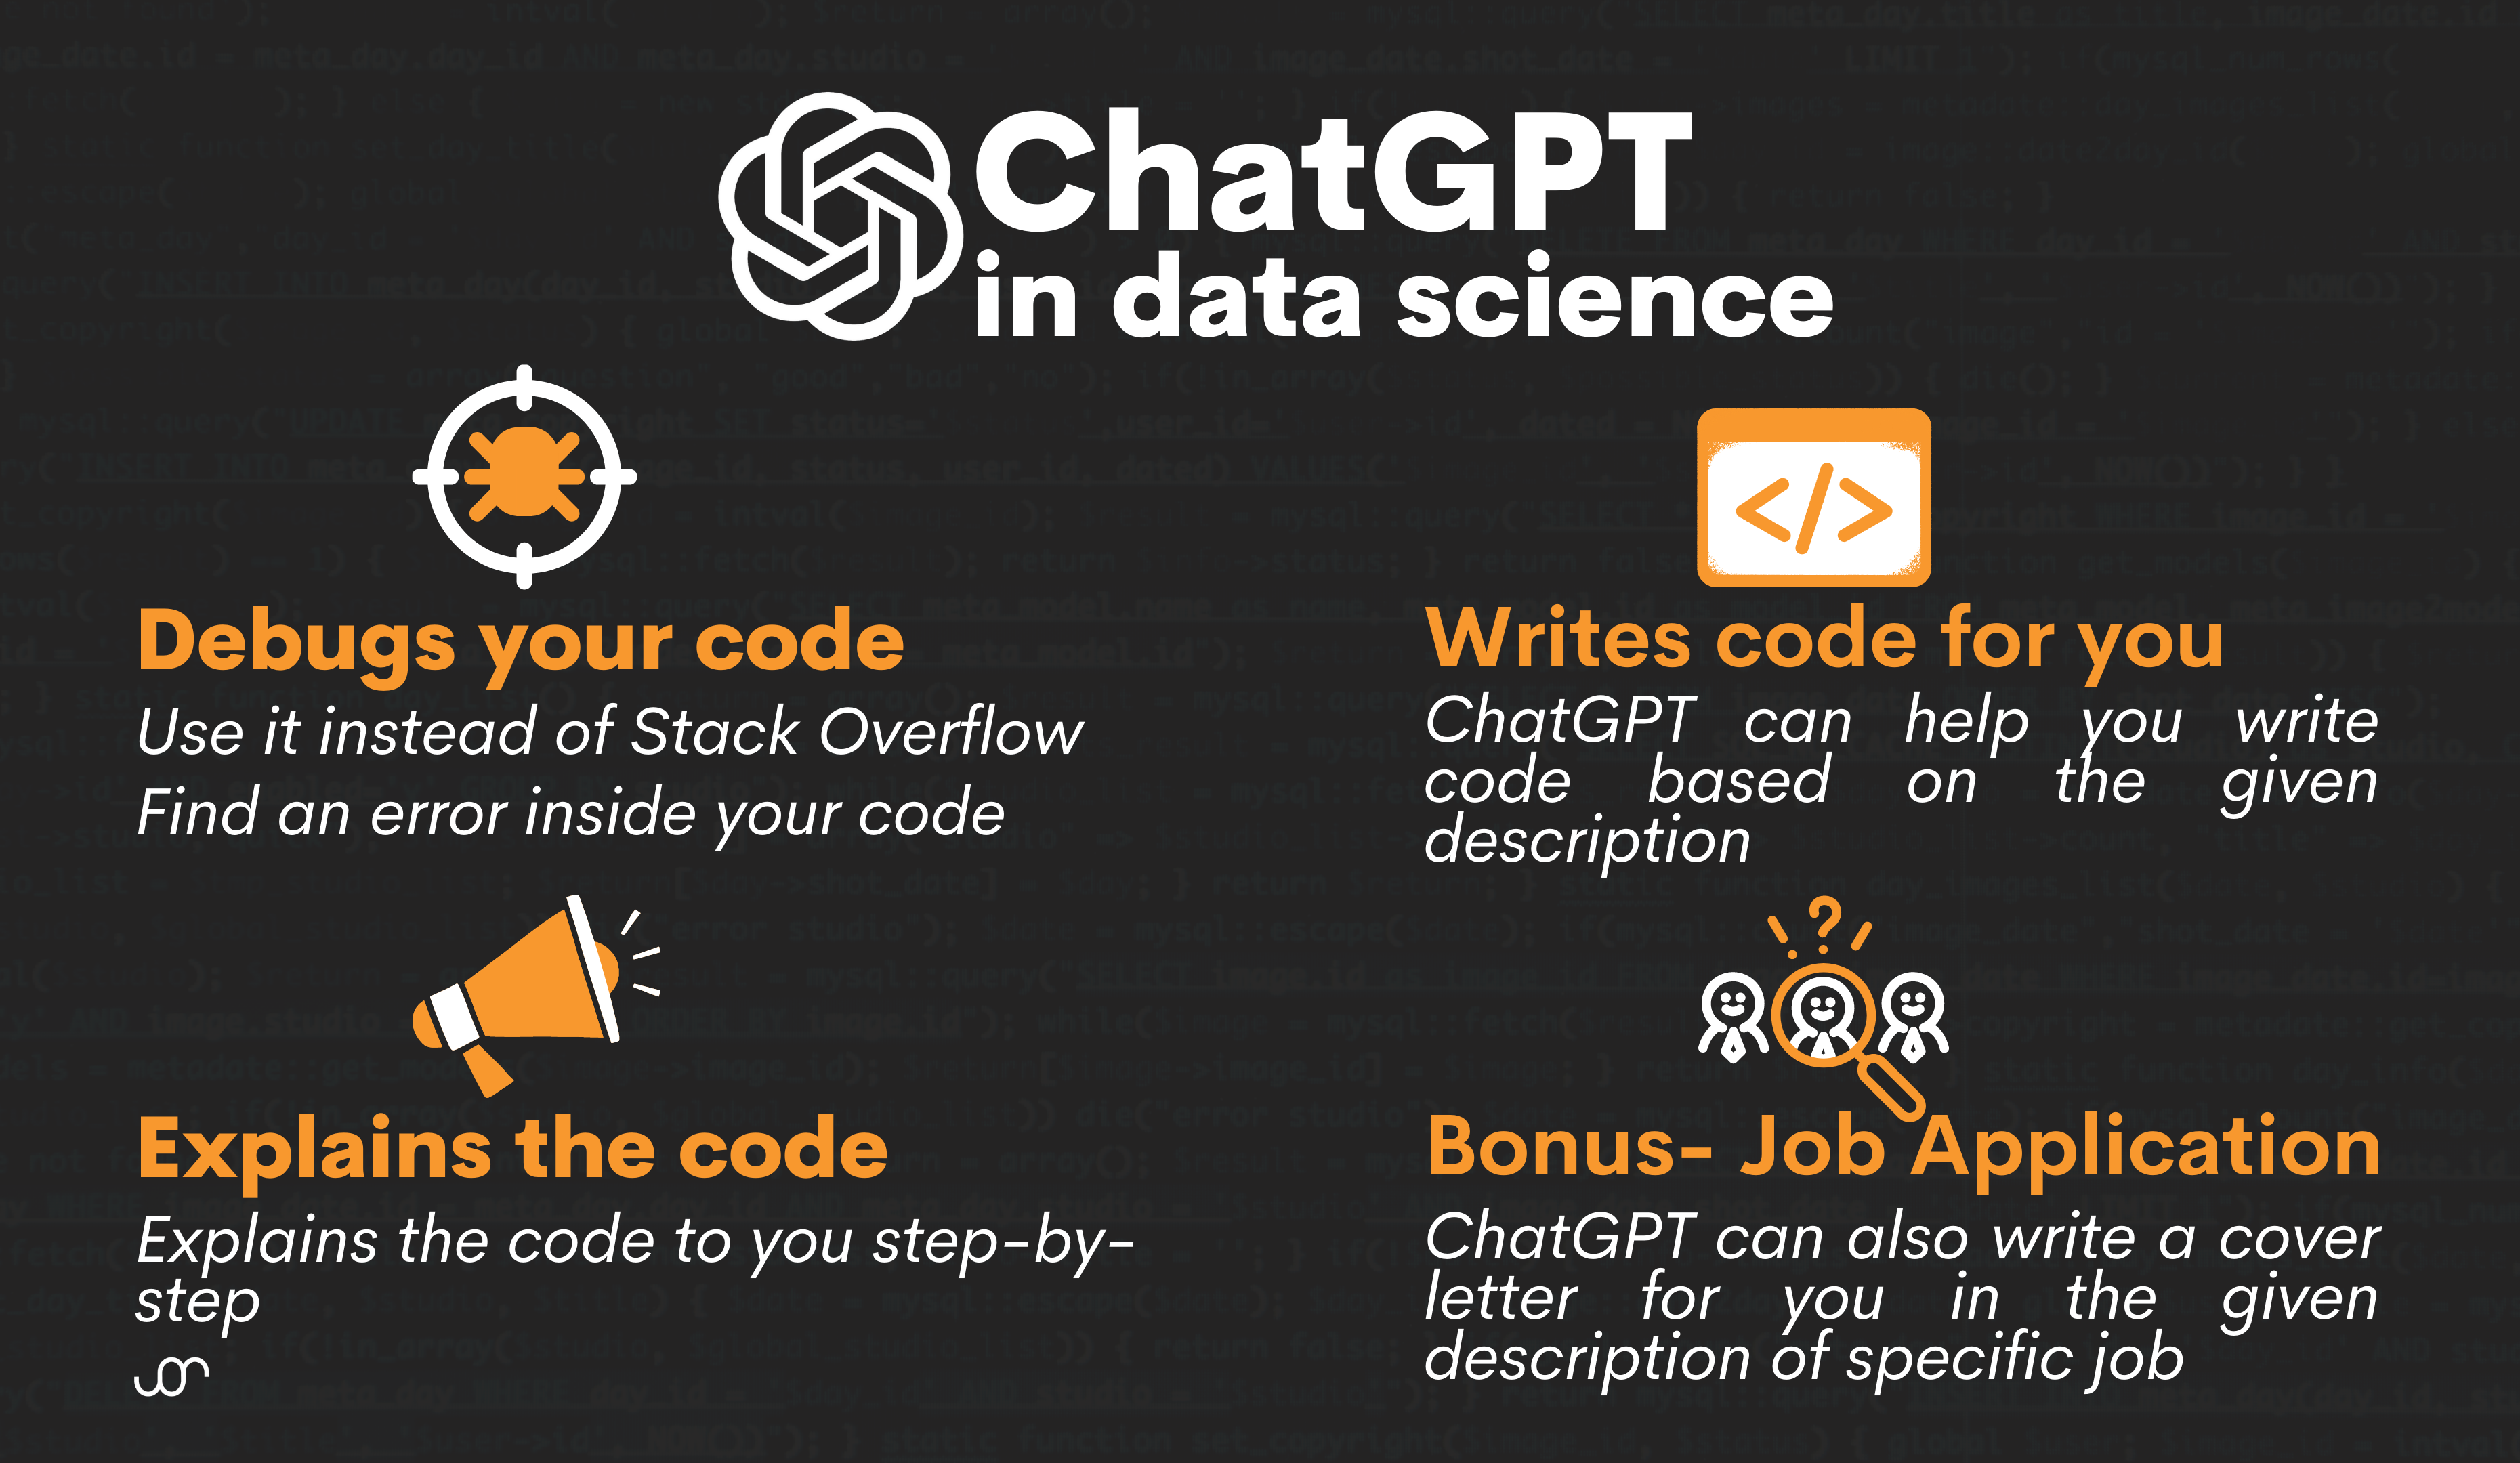 ChatGPT in Data Science